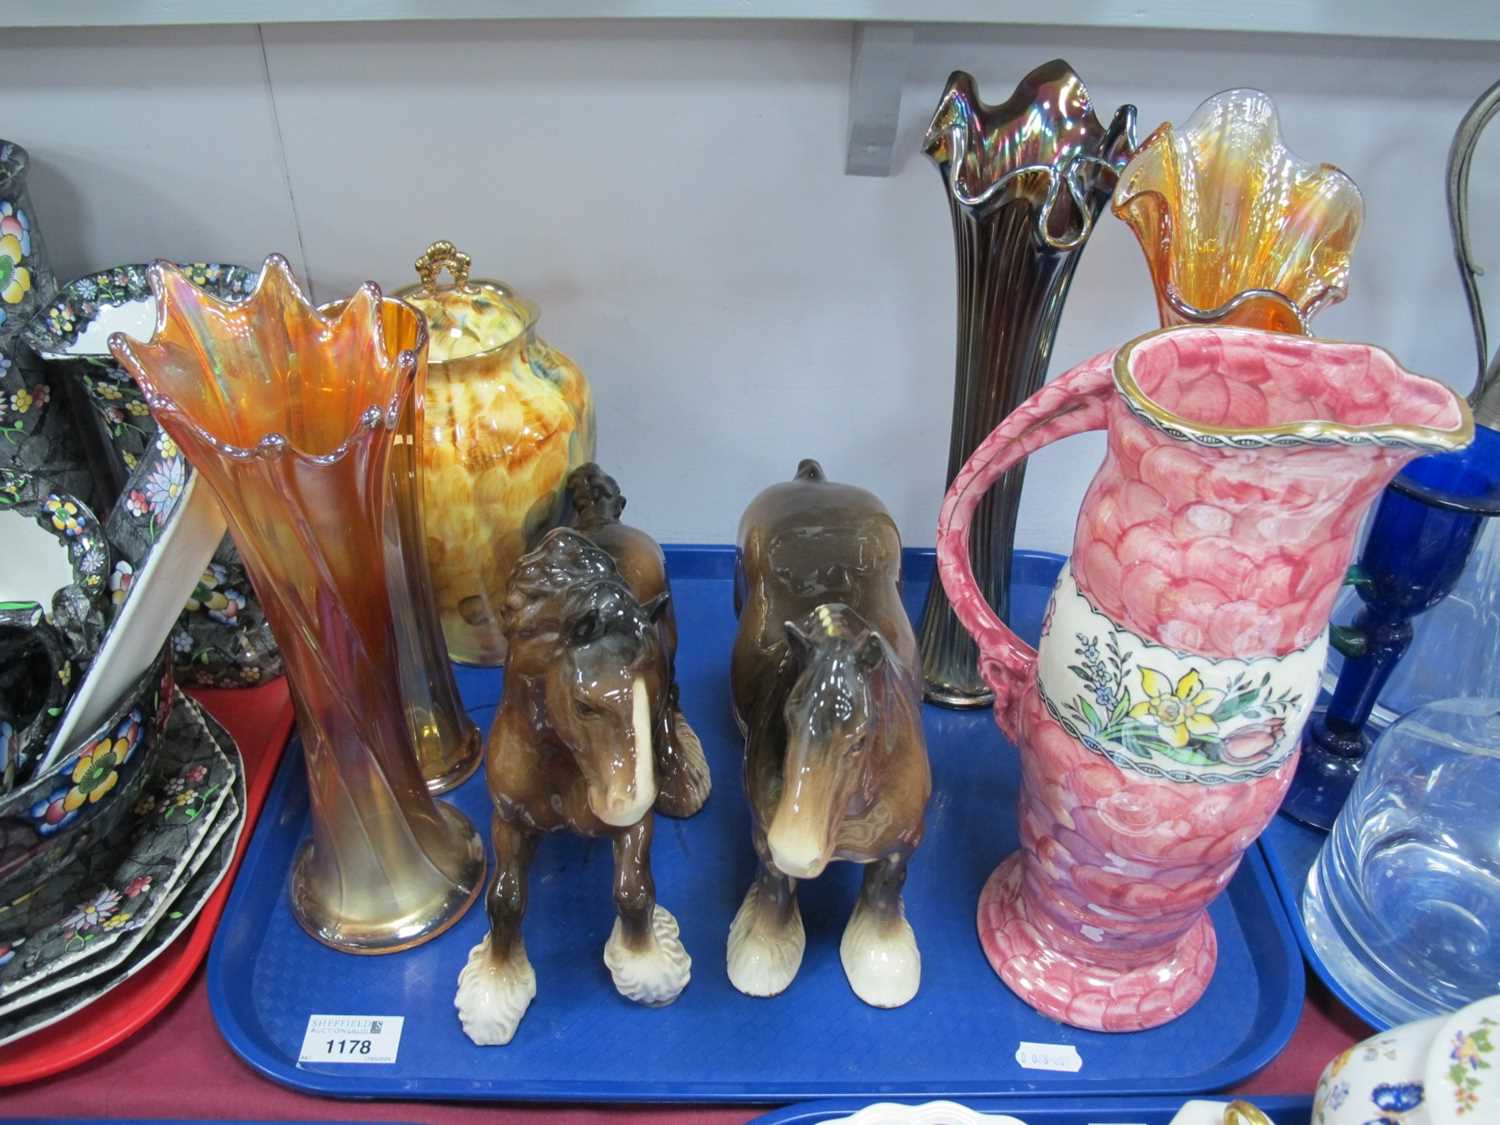 Two Beswick Shire Horses, Maling lustre vase, Carnival glass vases, etc:- One Tray.